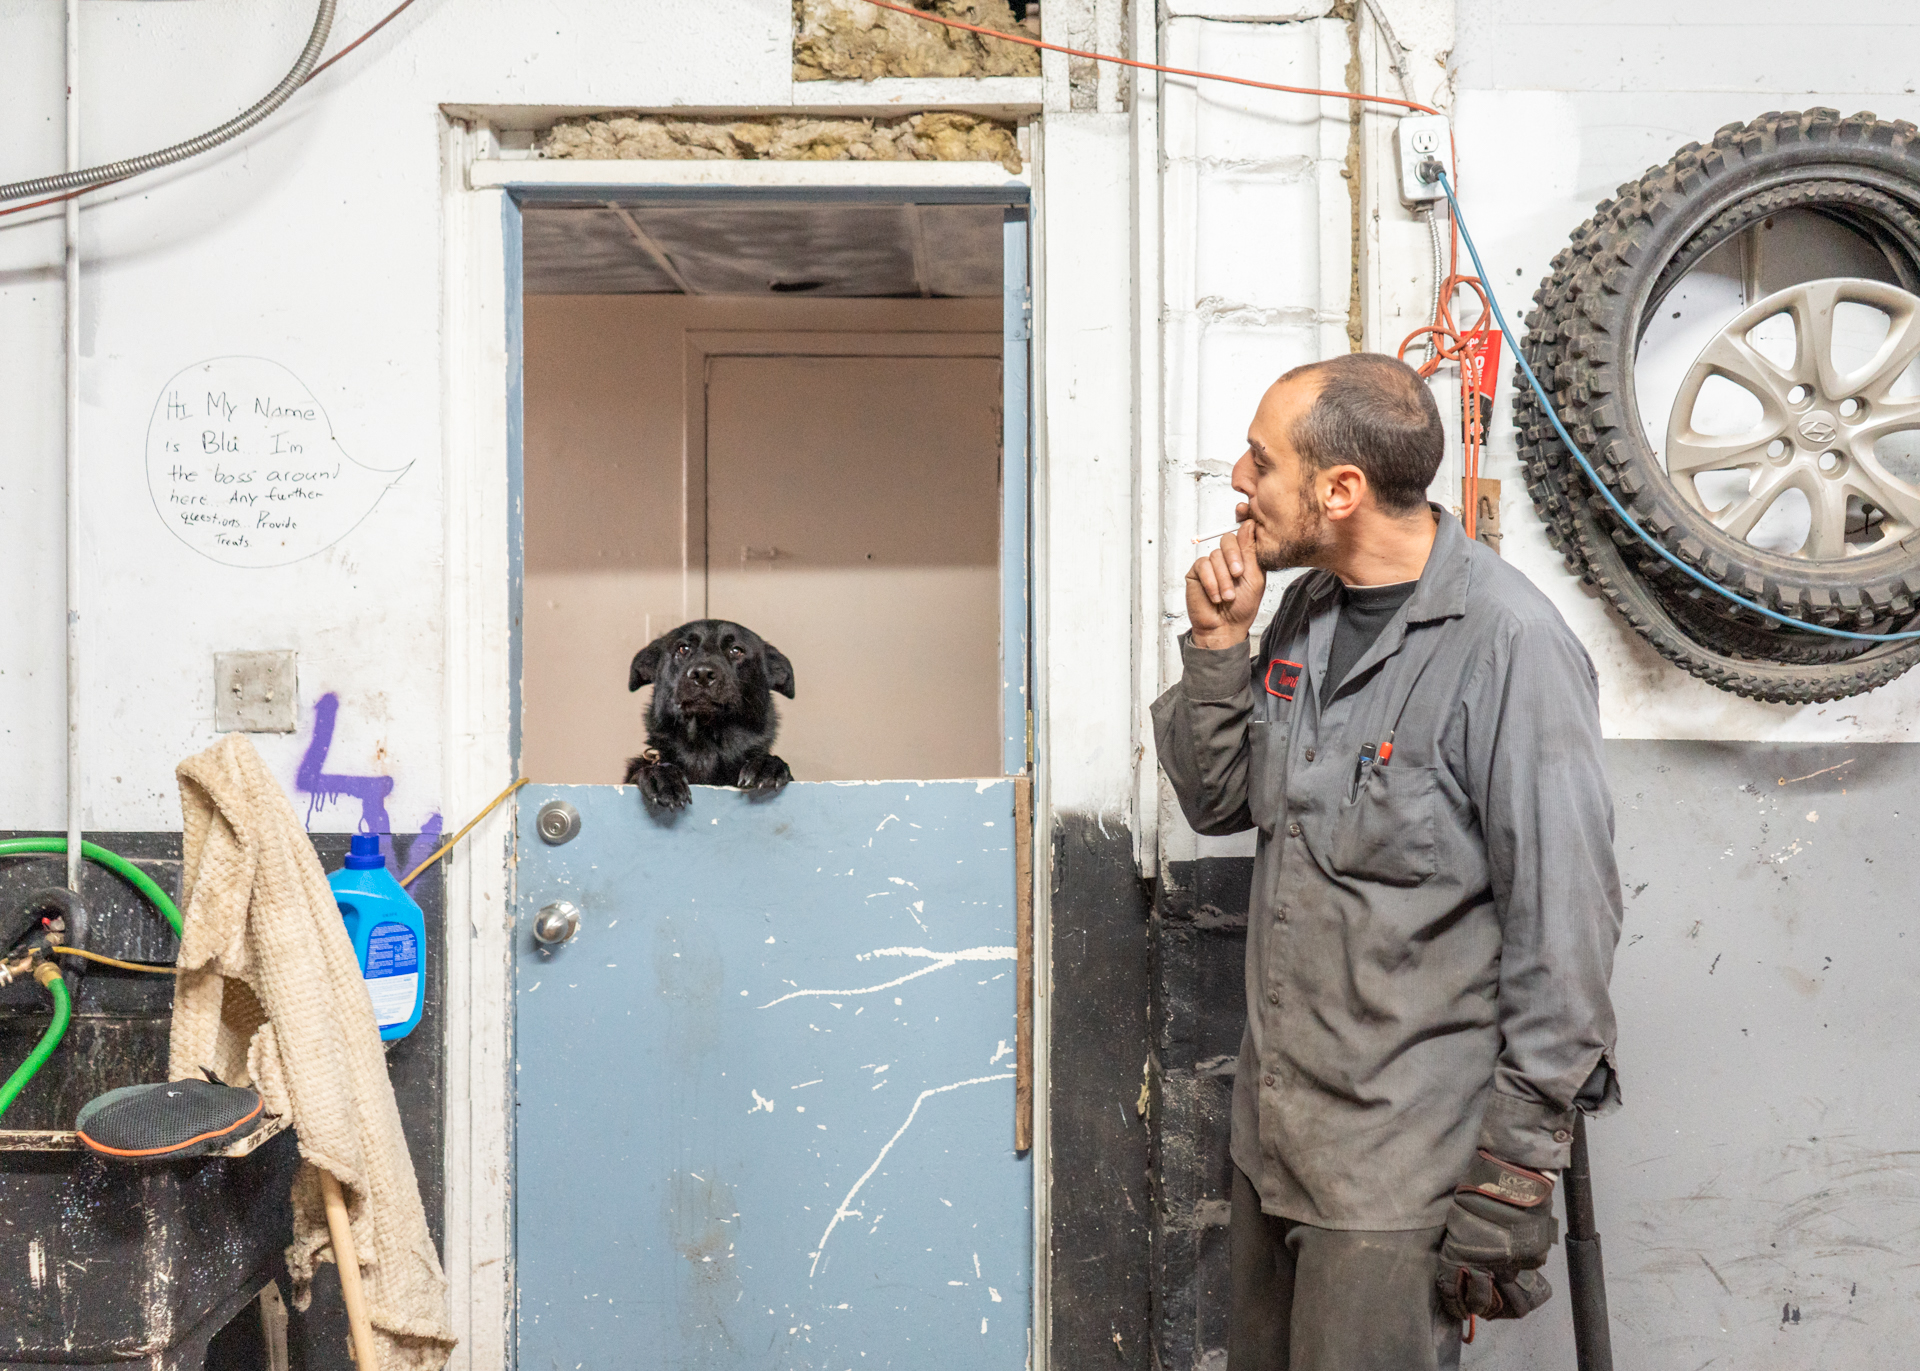 Blu: A mechanic watches as his black dog jumps up to poke its head above a ledge.